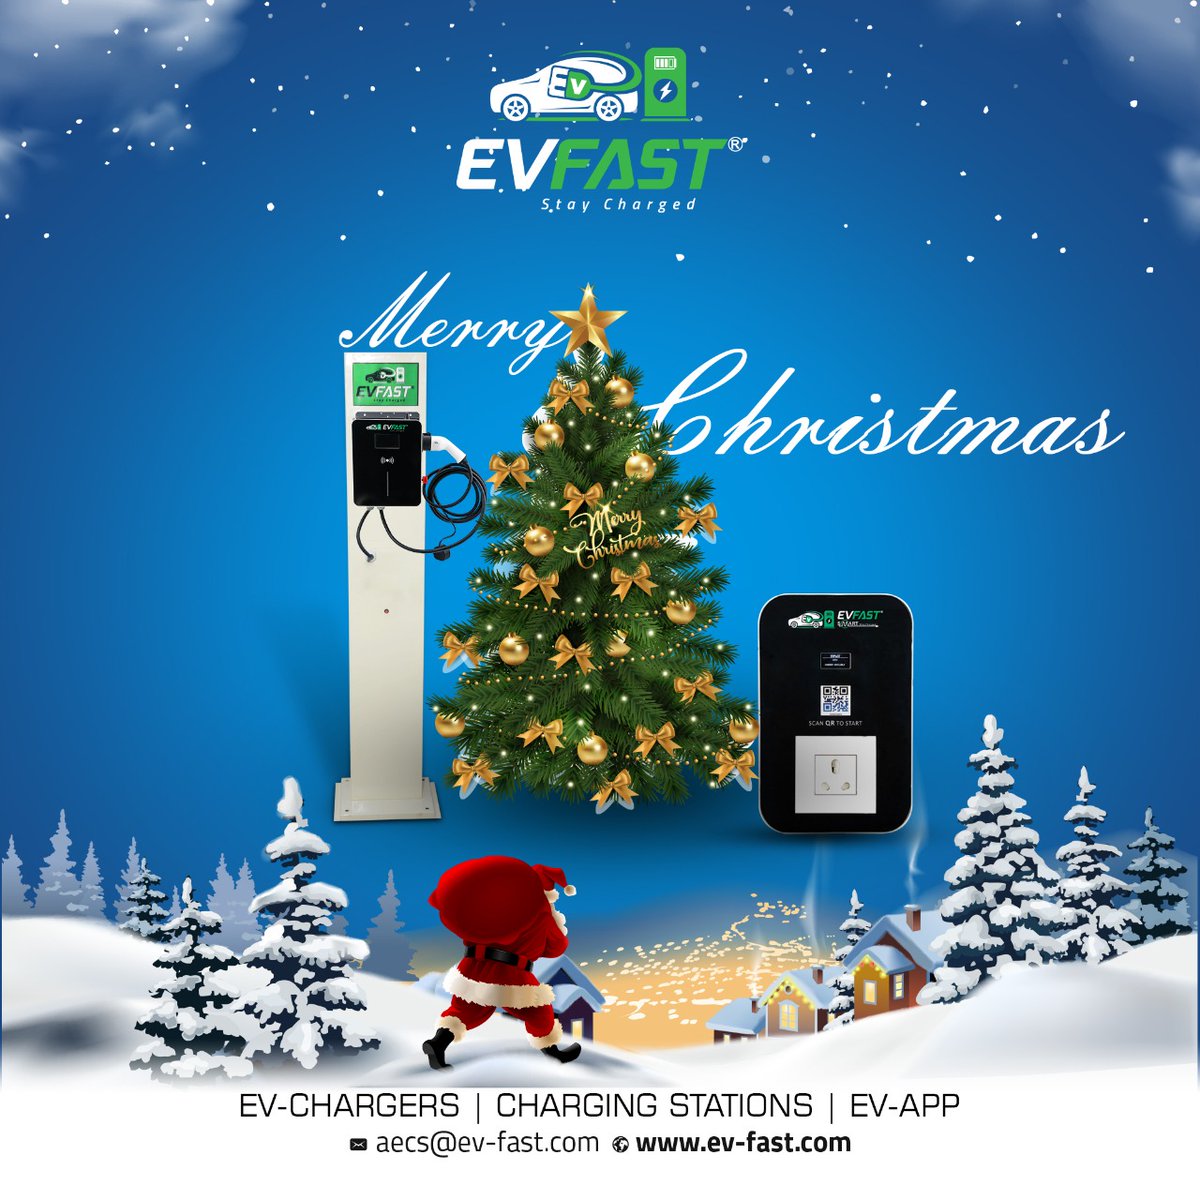 Charge up your Christmas with fun and
enjoyment!
A very Merry Christmas to everyone!

🌐 ev-fast.com
📞 91 93504 30777
.
#Christmas #merrychristmas #merrychristmas2022
#ChristmasDay2022 #HappyChristmas2022
#EVFastcharging #evfast #Chargers #eletriccharger
#ACcharger